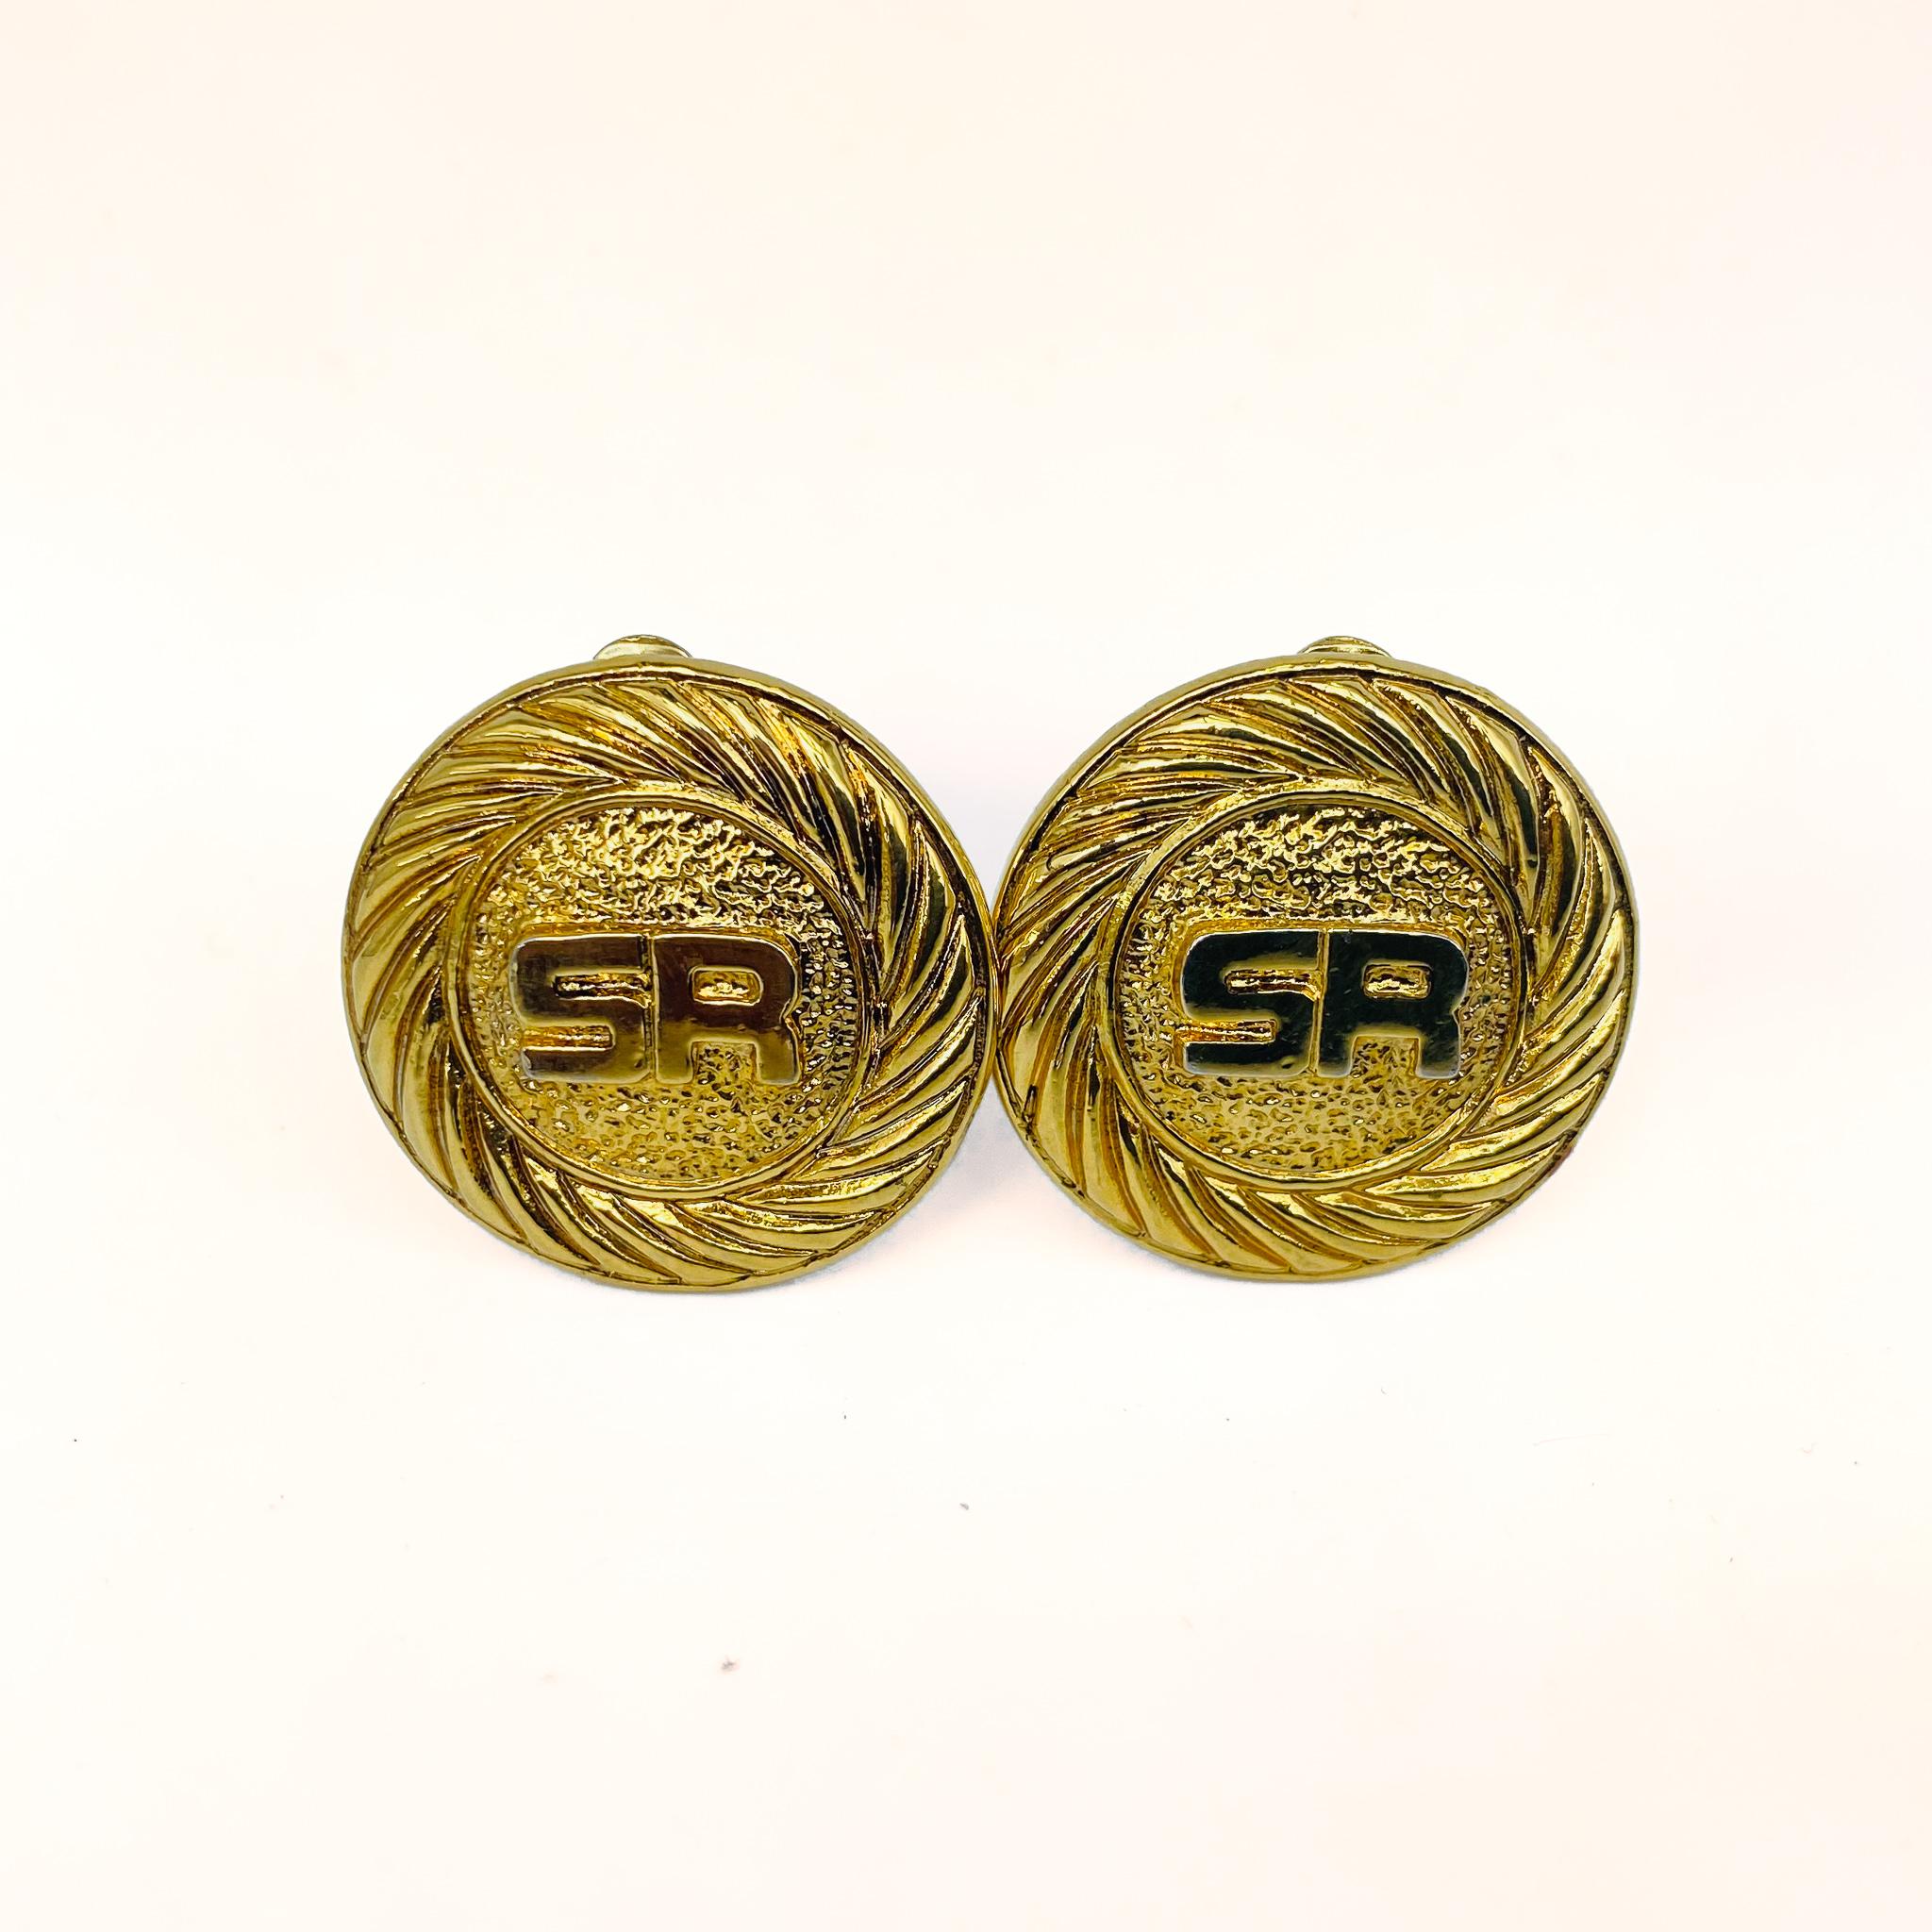 Vintage Sonia Rykiel Earrings 1980s

Timeless 1980s gold plated clip on earrings from Sonia Rykiel.

Sonia Rykiel, dubbed 'Queen of Knitwear', is best known for liberating women from restrictive clothing in the 1960s - 1980s and contributing to the